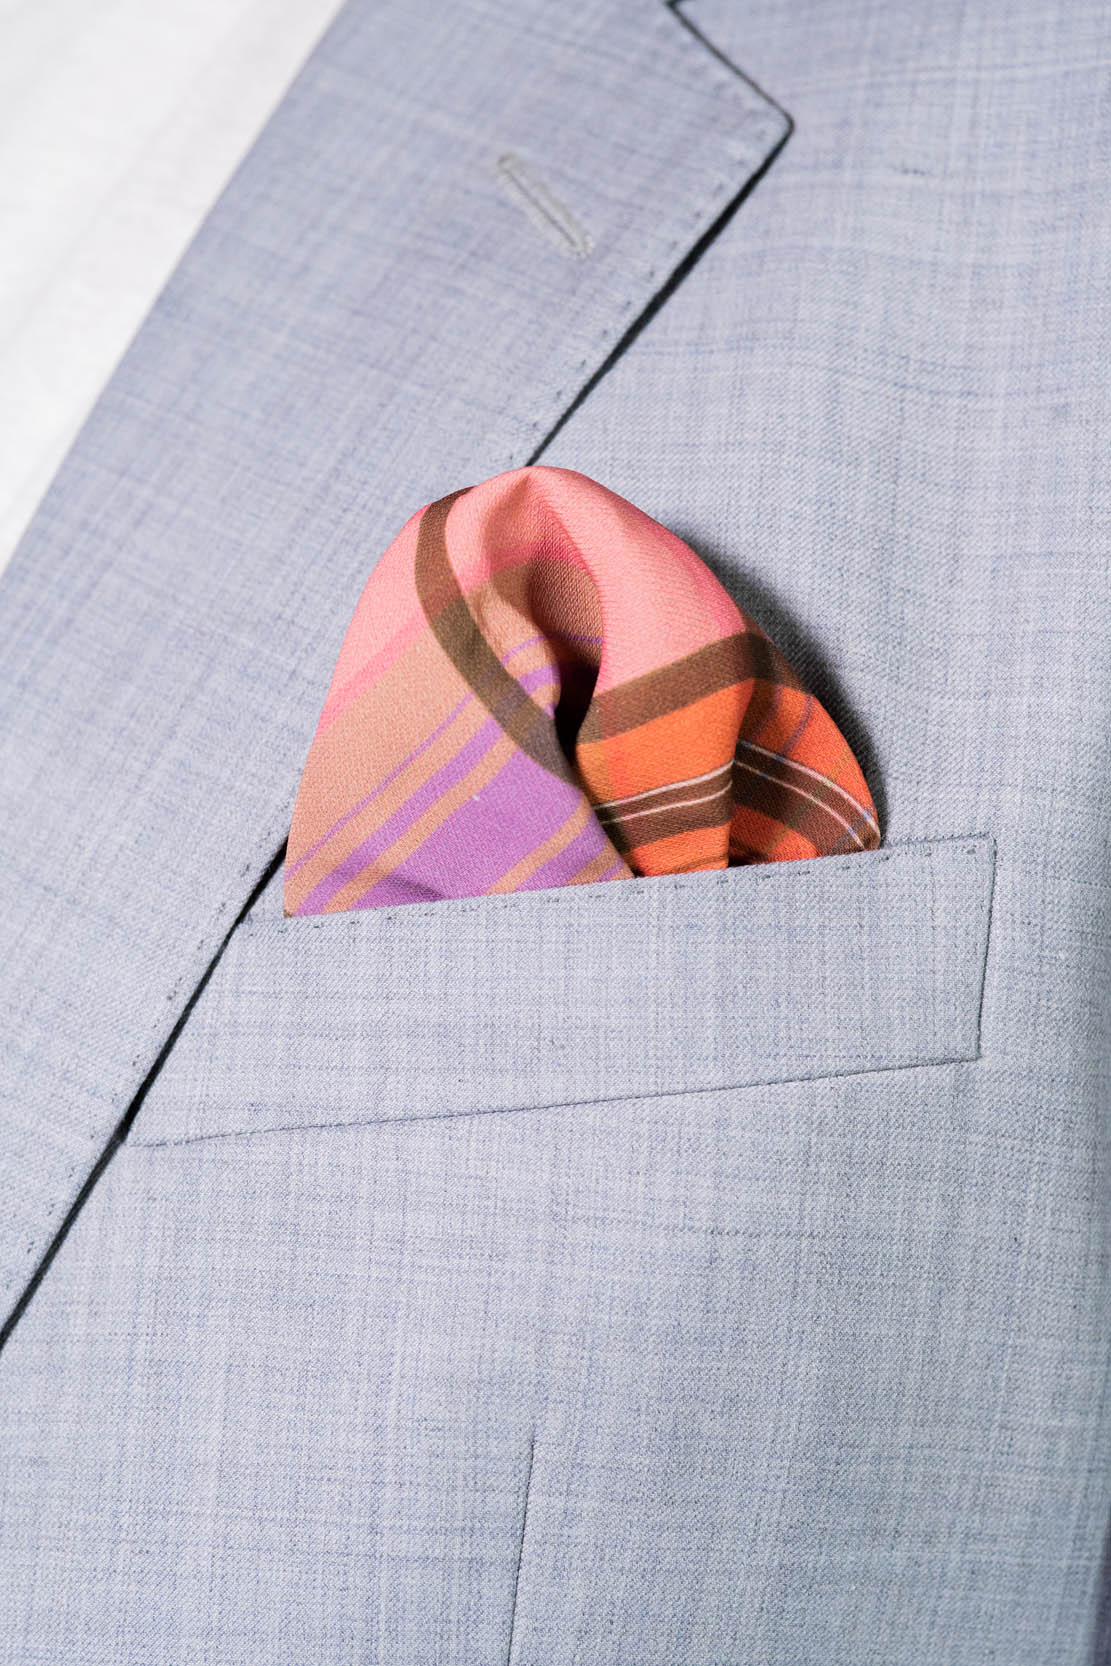 RARE CUT's Rosé All Day Pocket Square Worn in a Suit Jacket